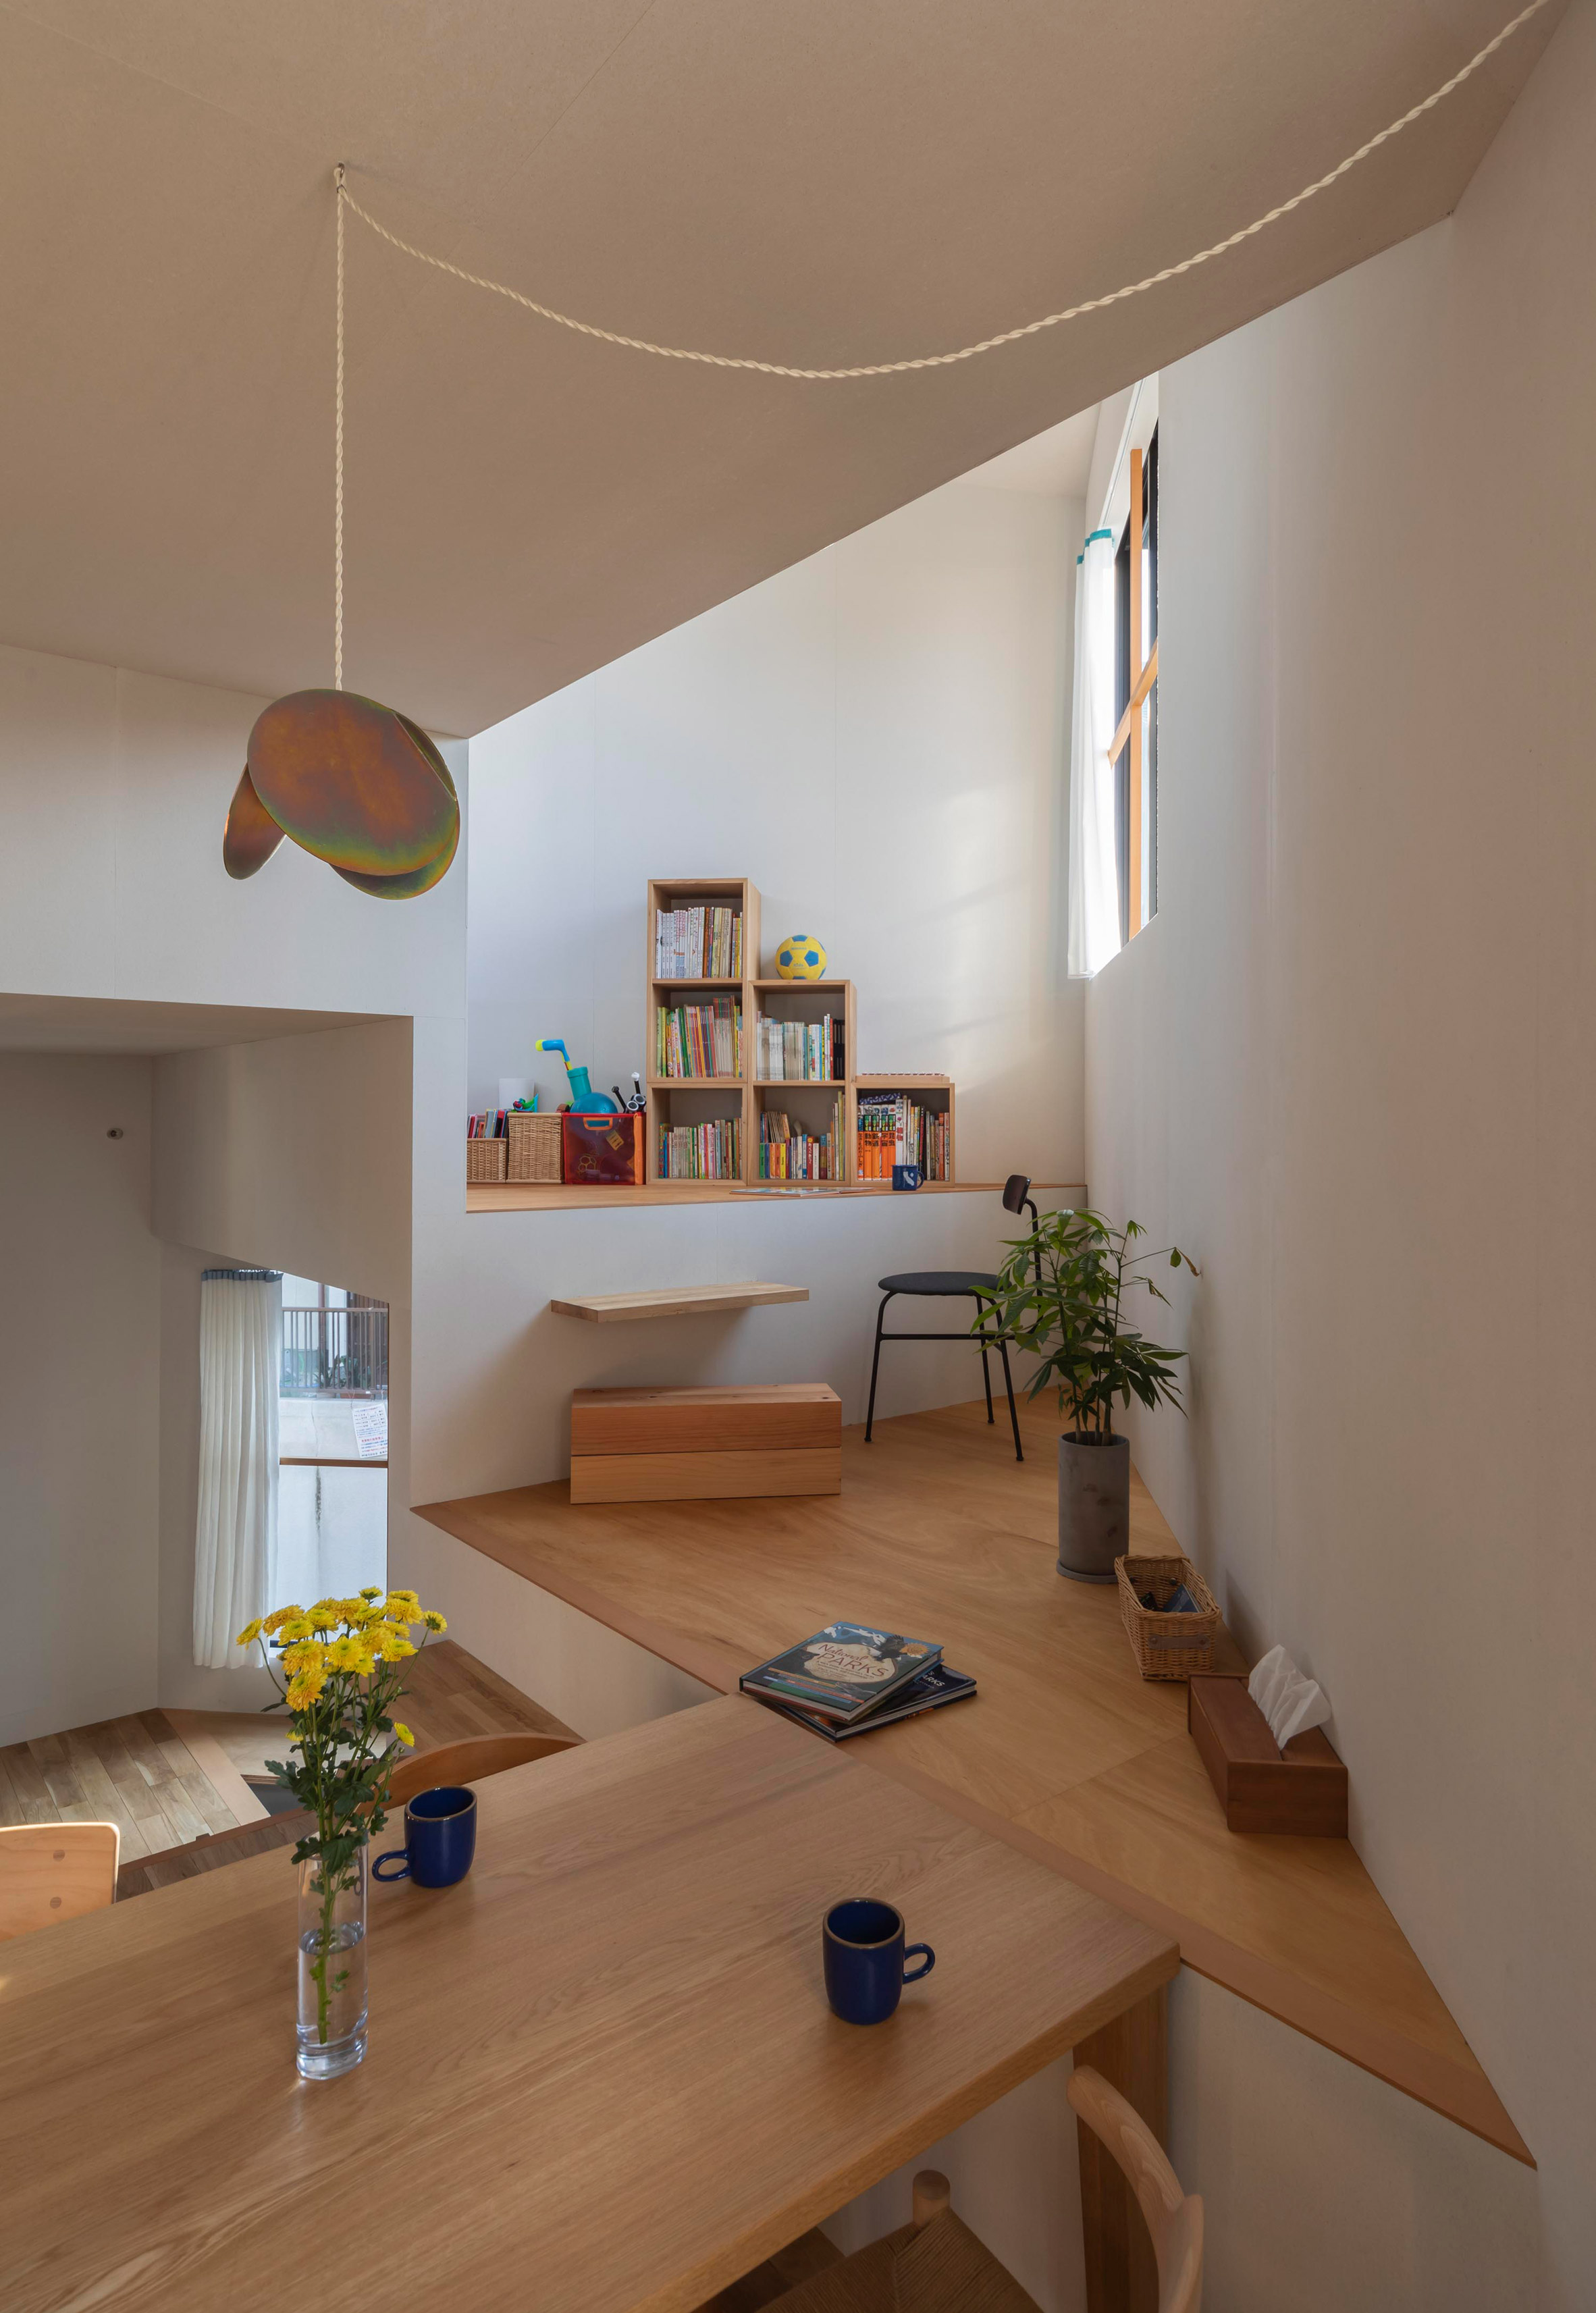 House in Takatsuki by Tato Architects dining table